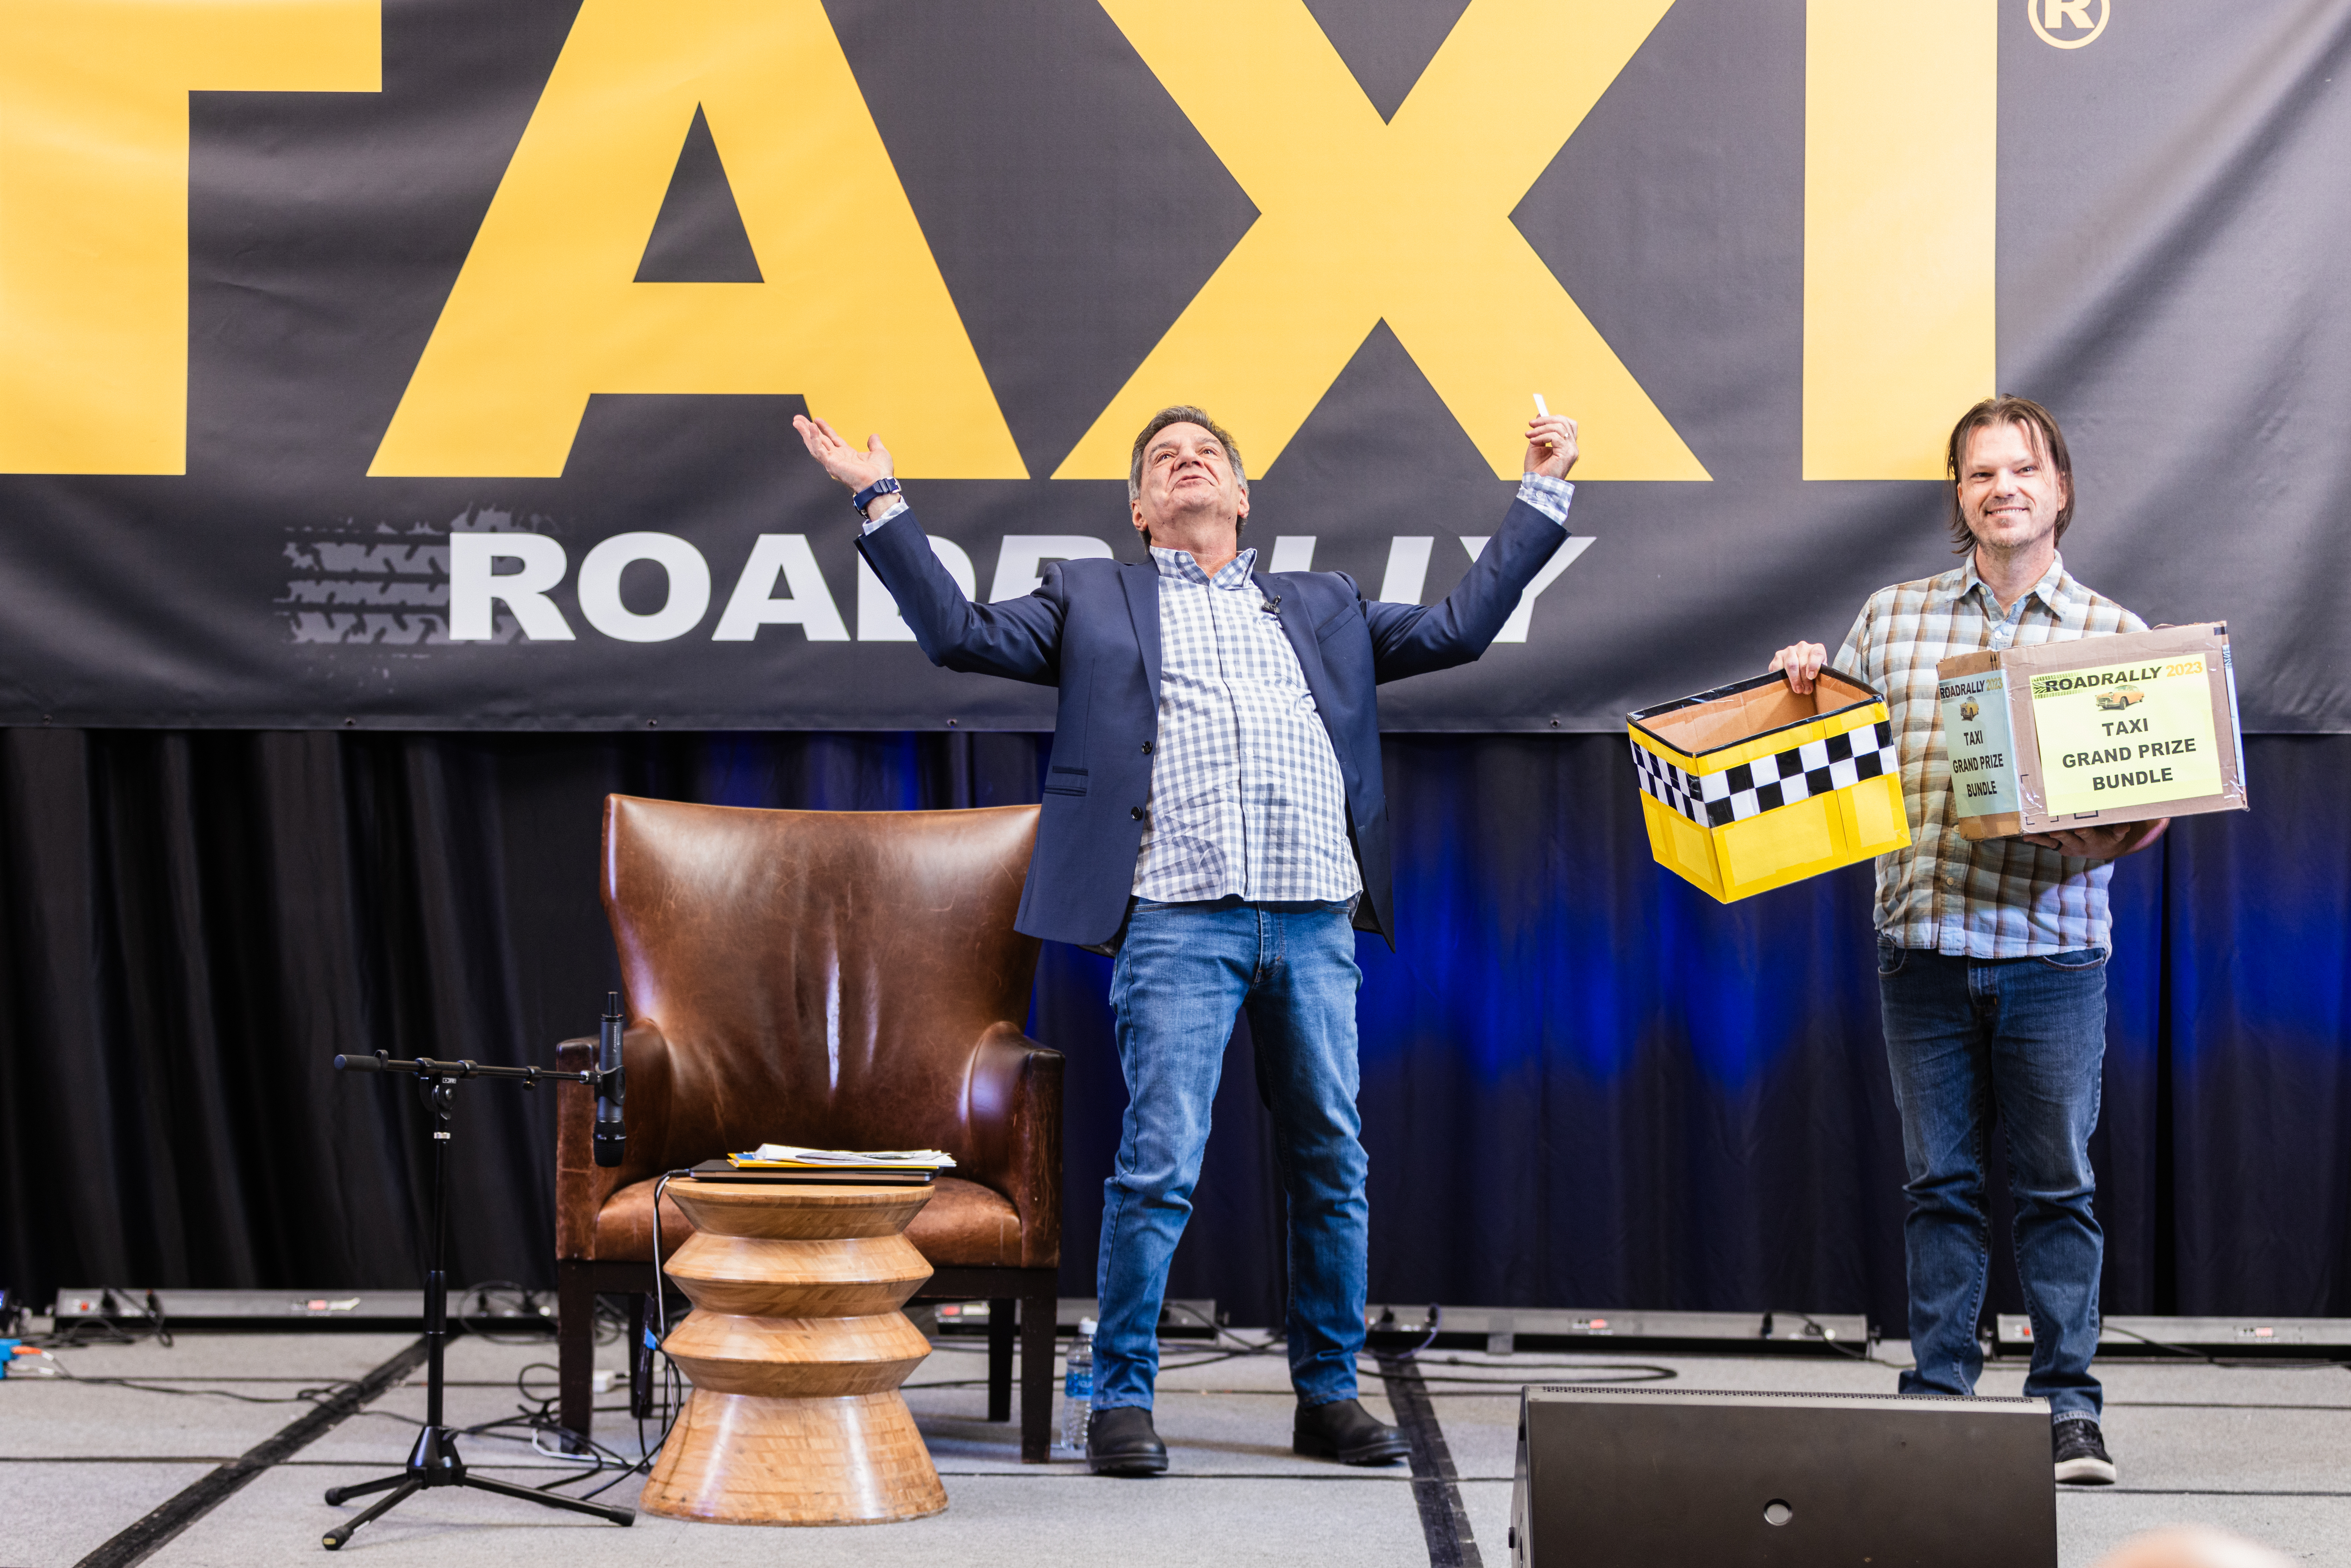 TAXI CEO, Michael Laskow, thanks God when he finally drew a winning number for the Grand Prize giveaway.